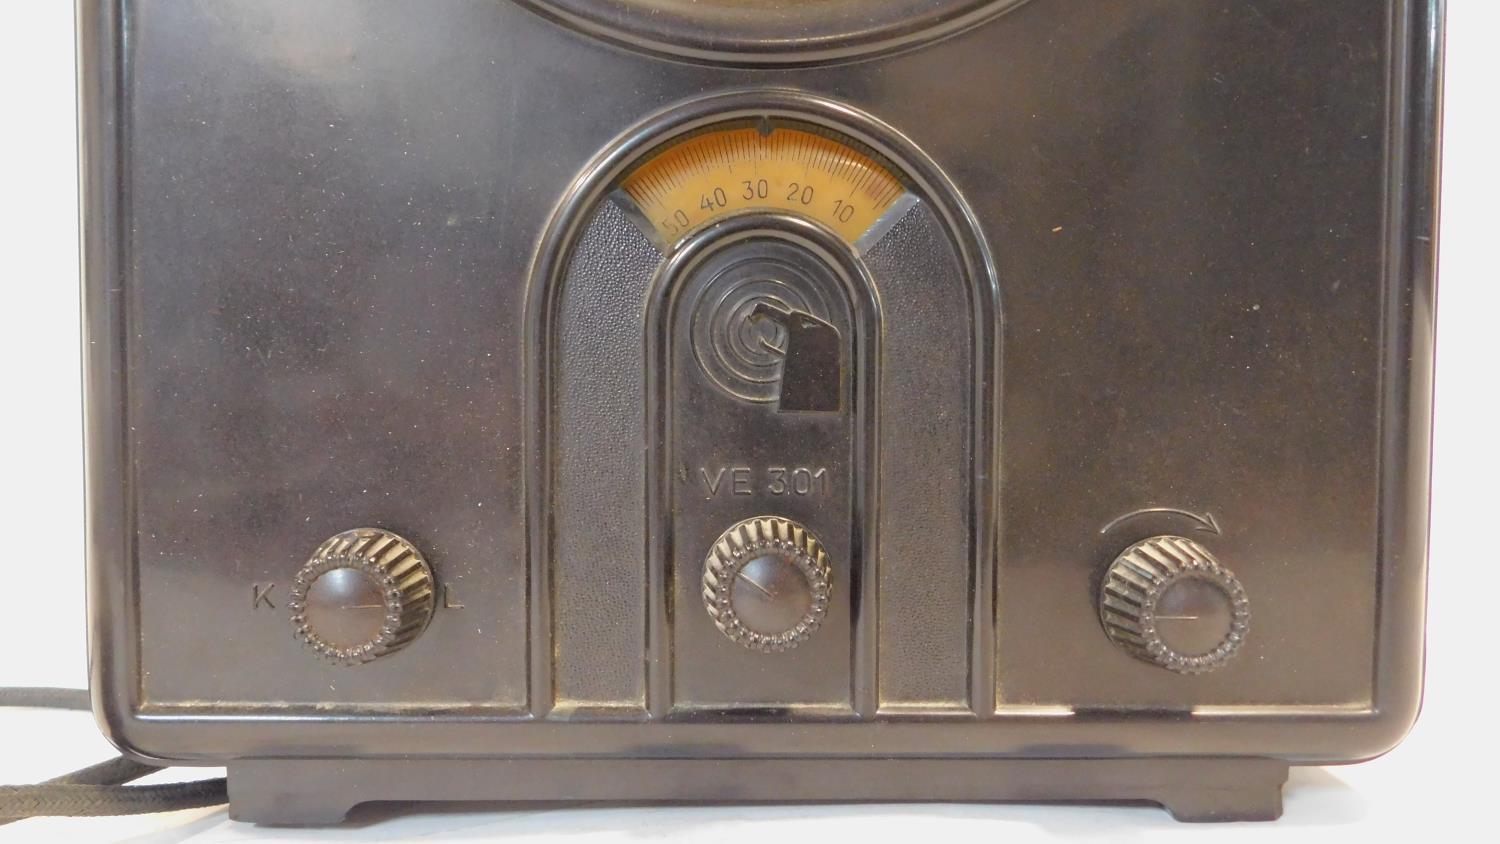 A WW2 bakelite radio, Volksempfänger Model VE301 (Peoples Radio) with the German Imperial Eagle's - Image 5 of 6